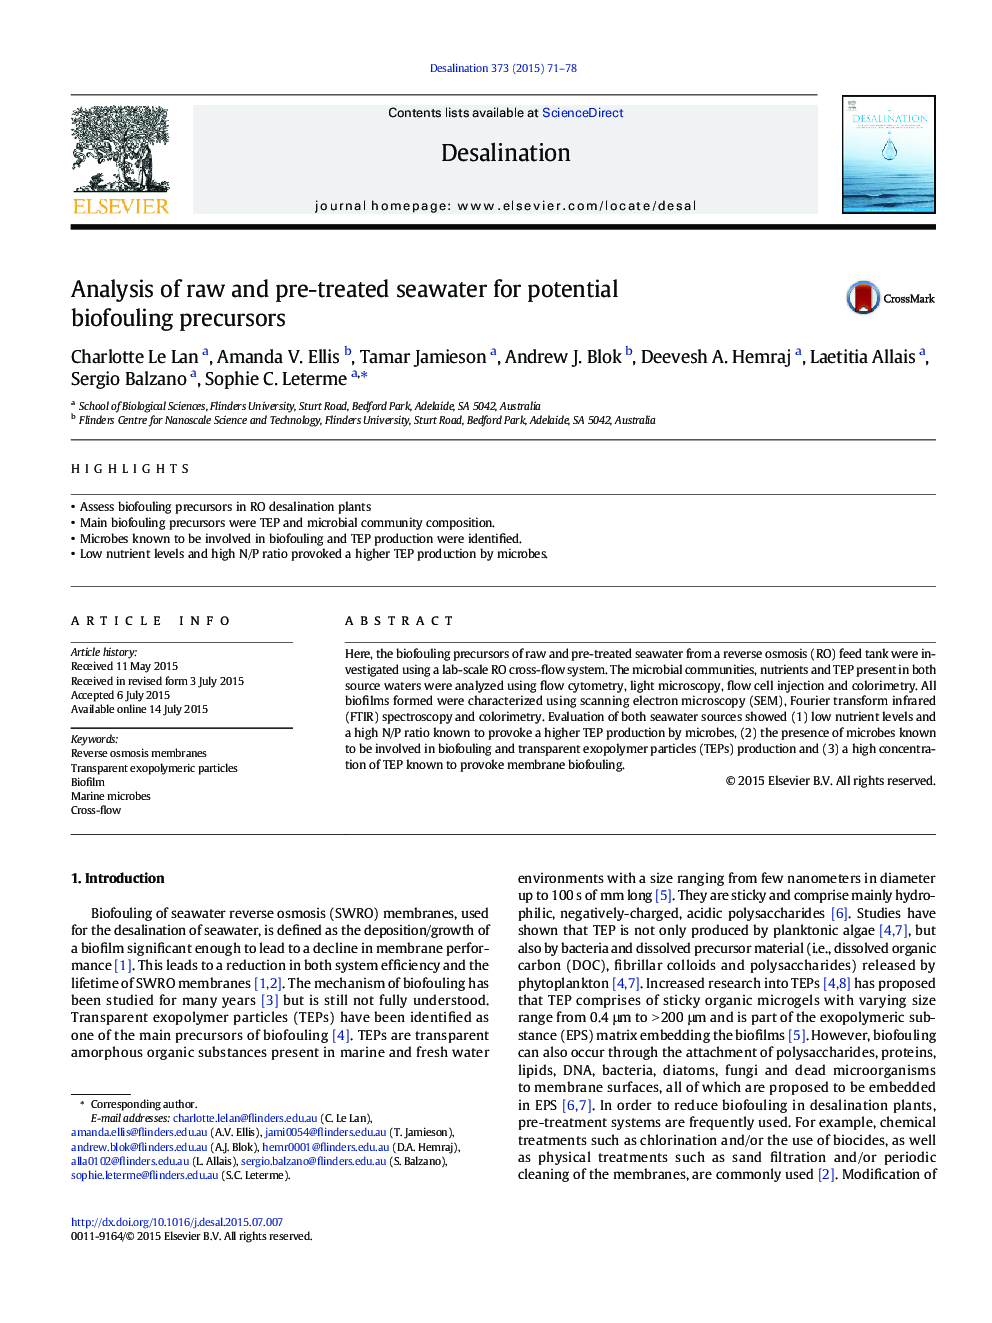 Analysis of raw and pre-treated seawater for potential biofouling precursors